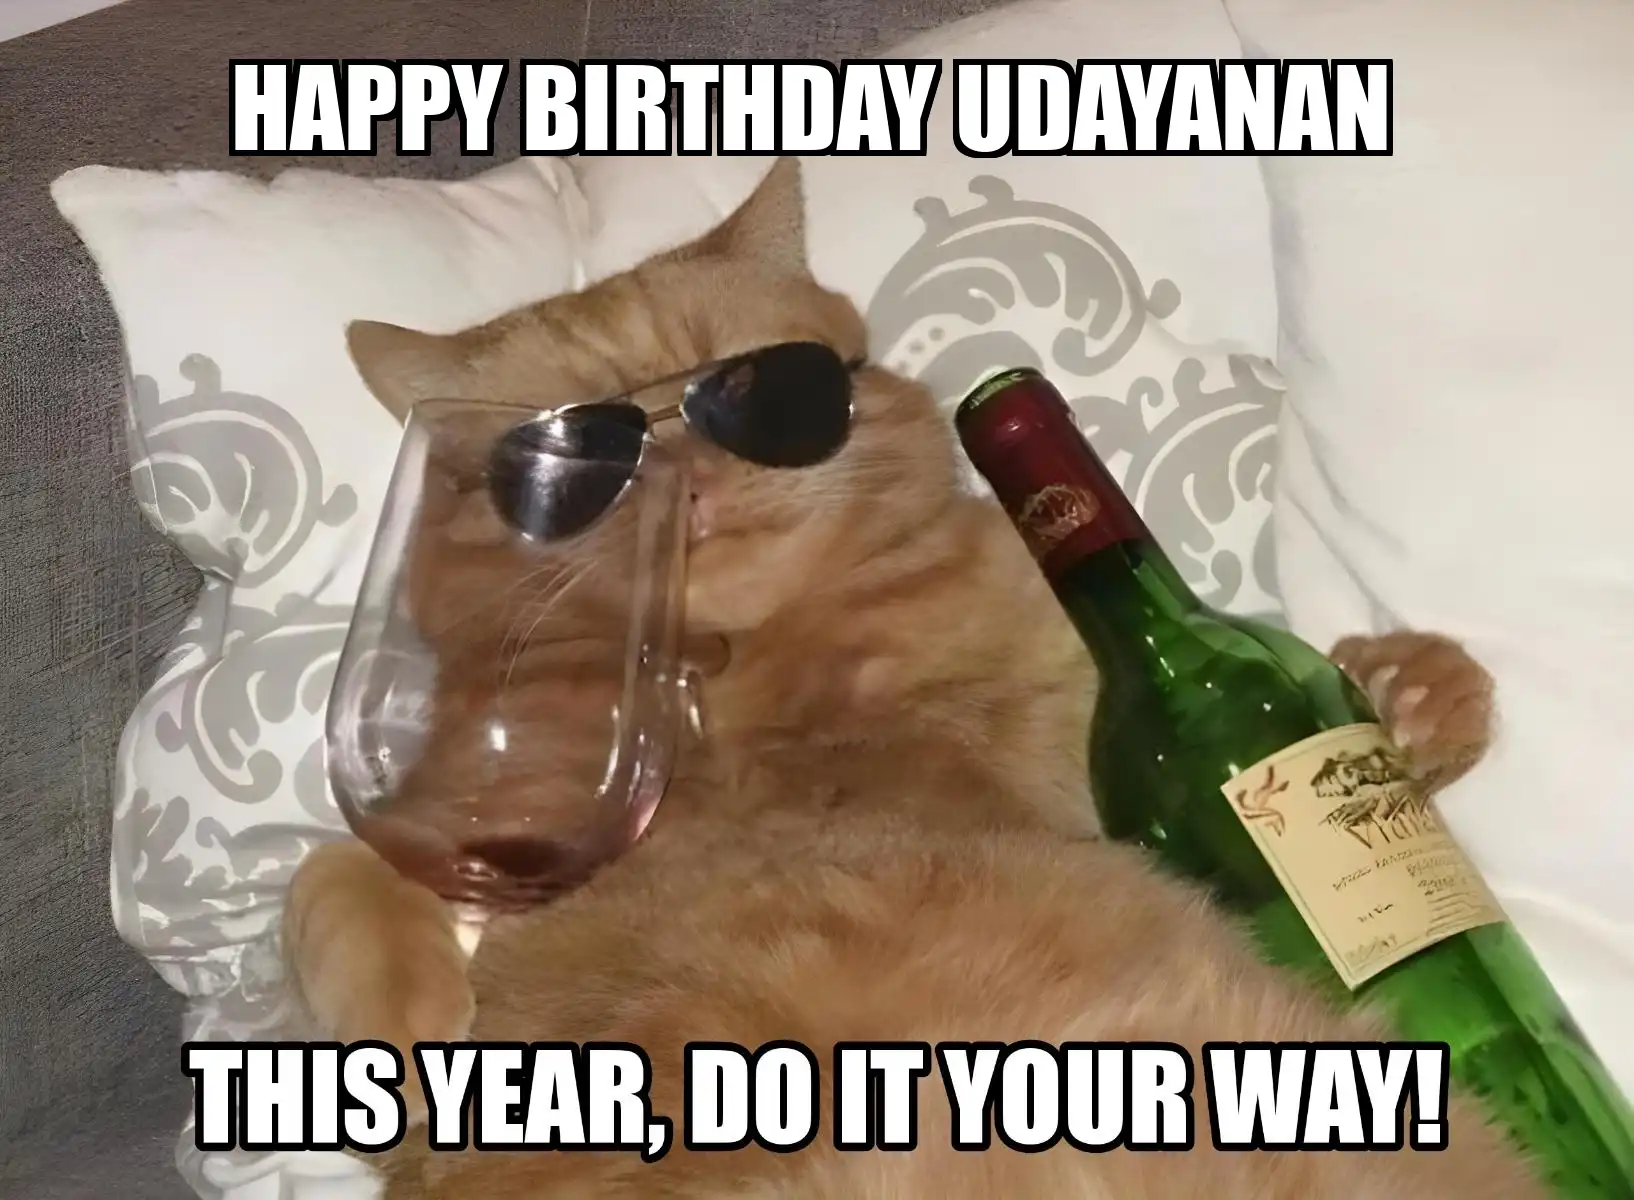 Happy Birthday Udayanan This Year Do It Your Way Meme